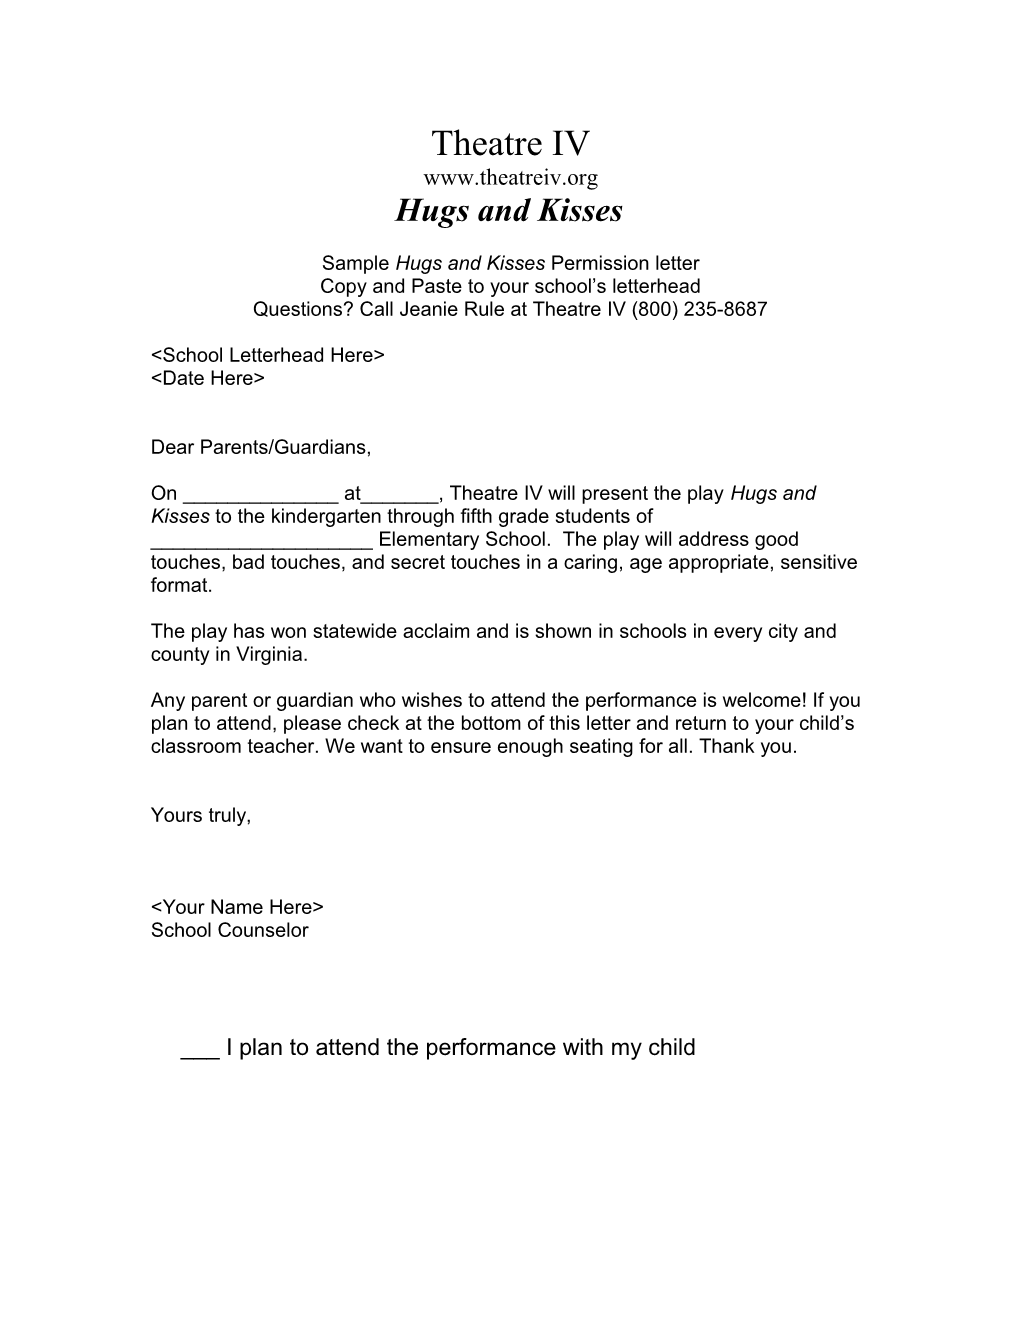 Sample Hugs and Kisses Permission Letter to Be Put on Your School S Letterhead